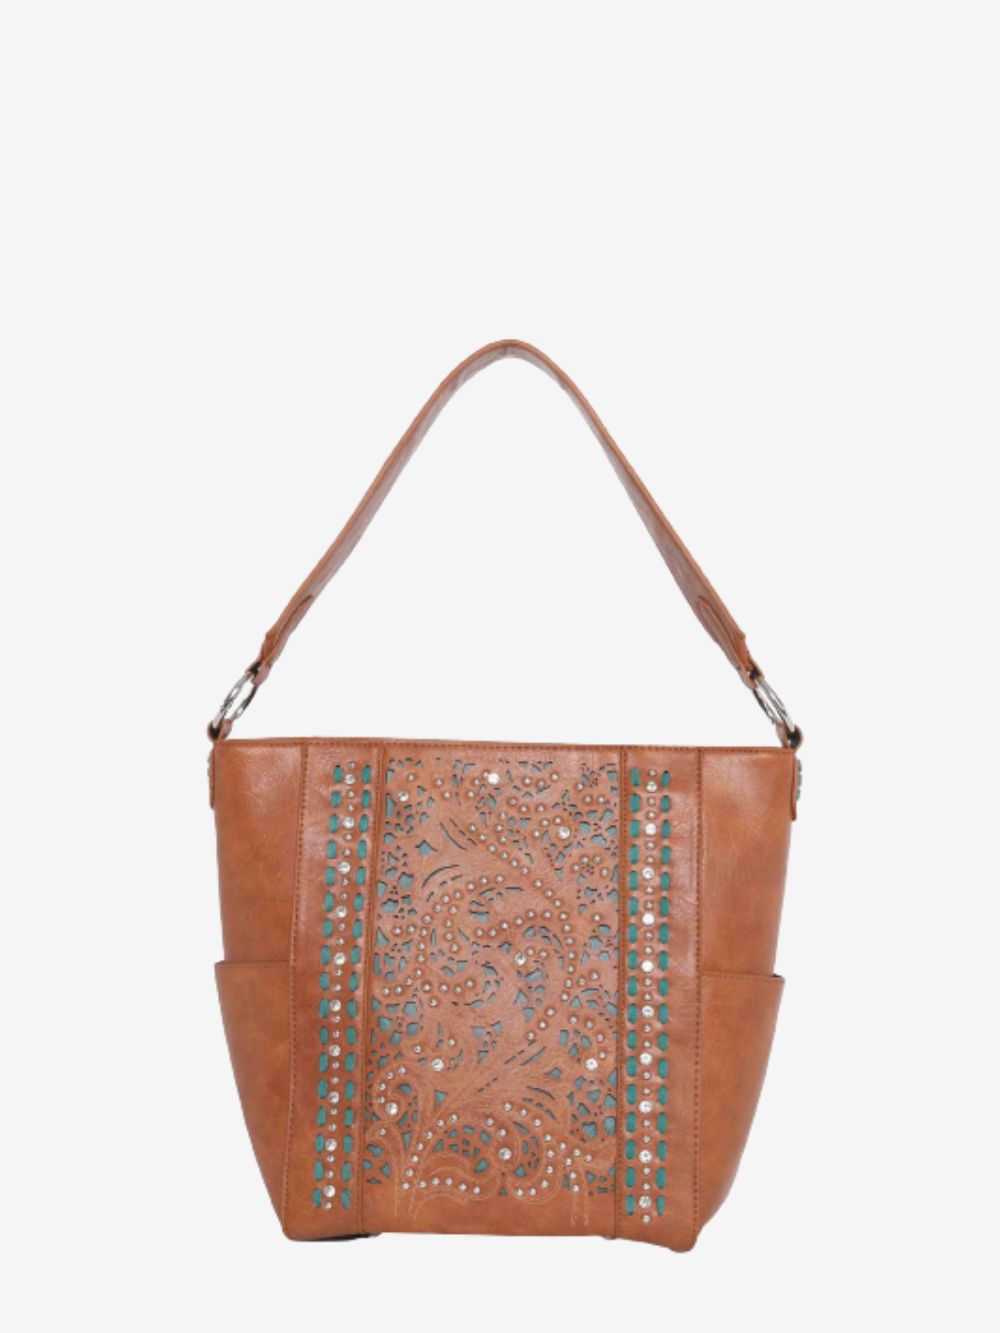 Montana West Vintage Floral Cut-Out Hobo - Montana West World